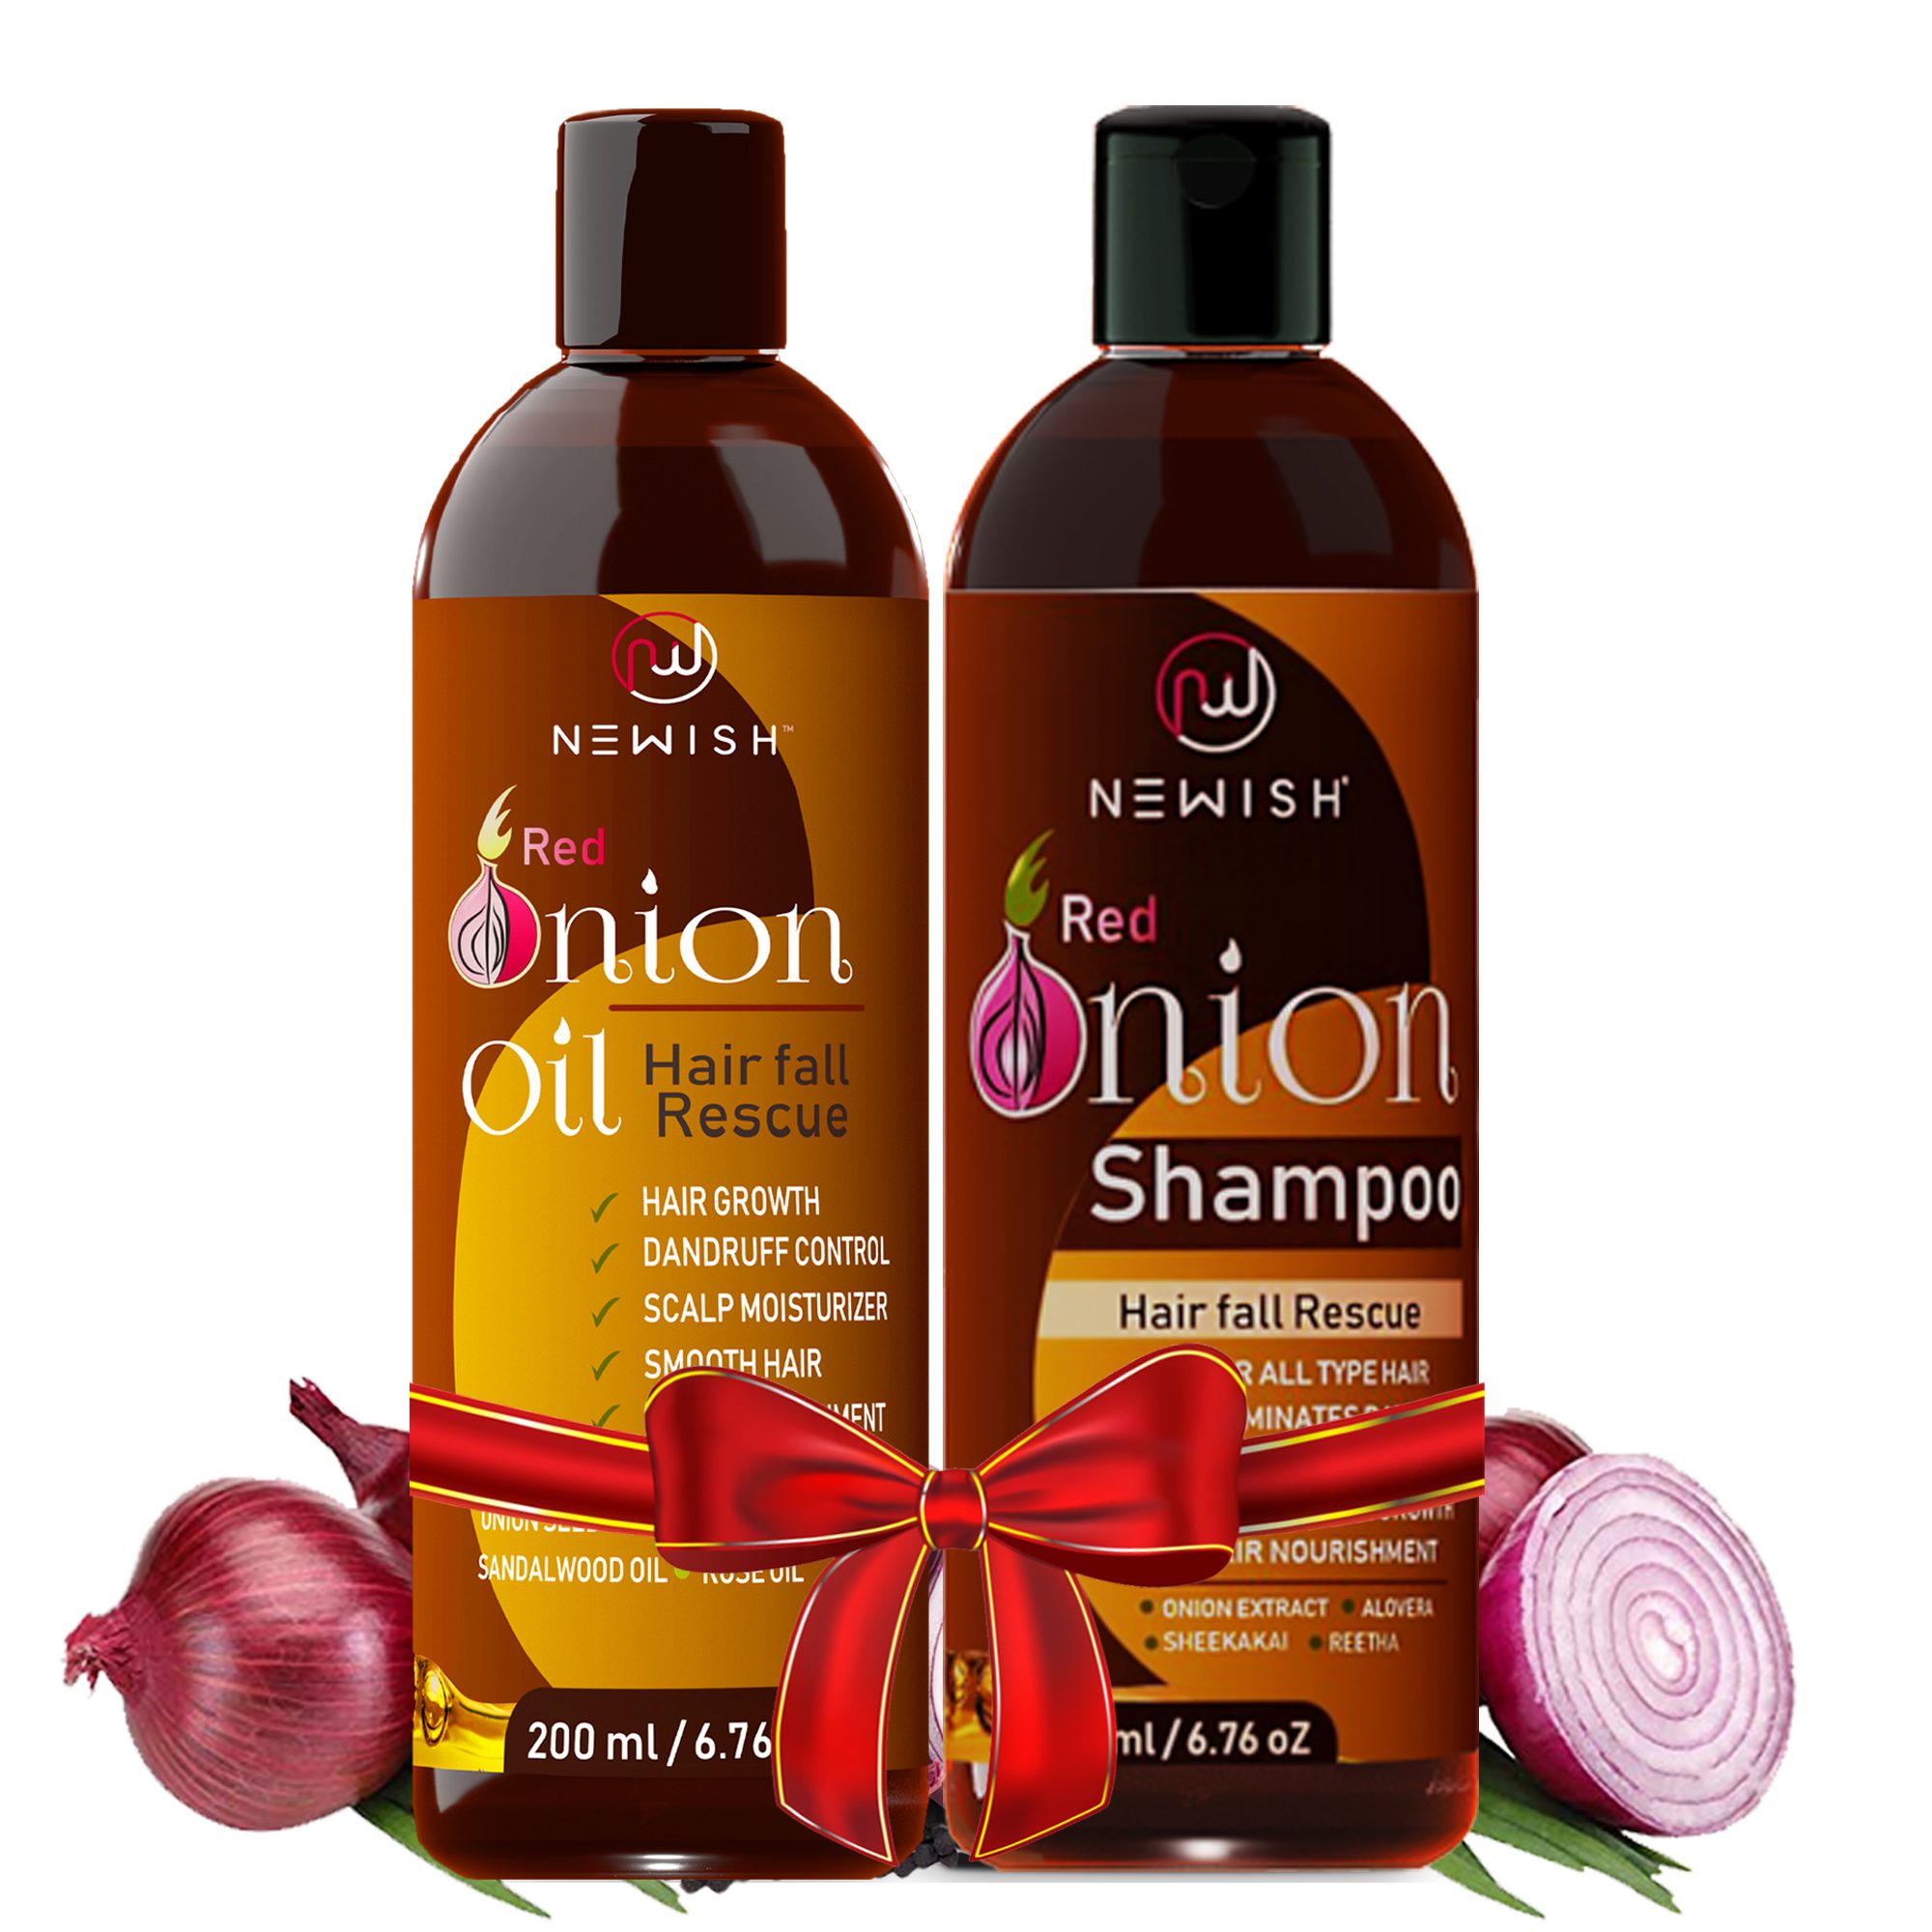 red onion oil and shampoo for hair